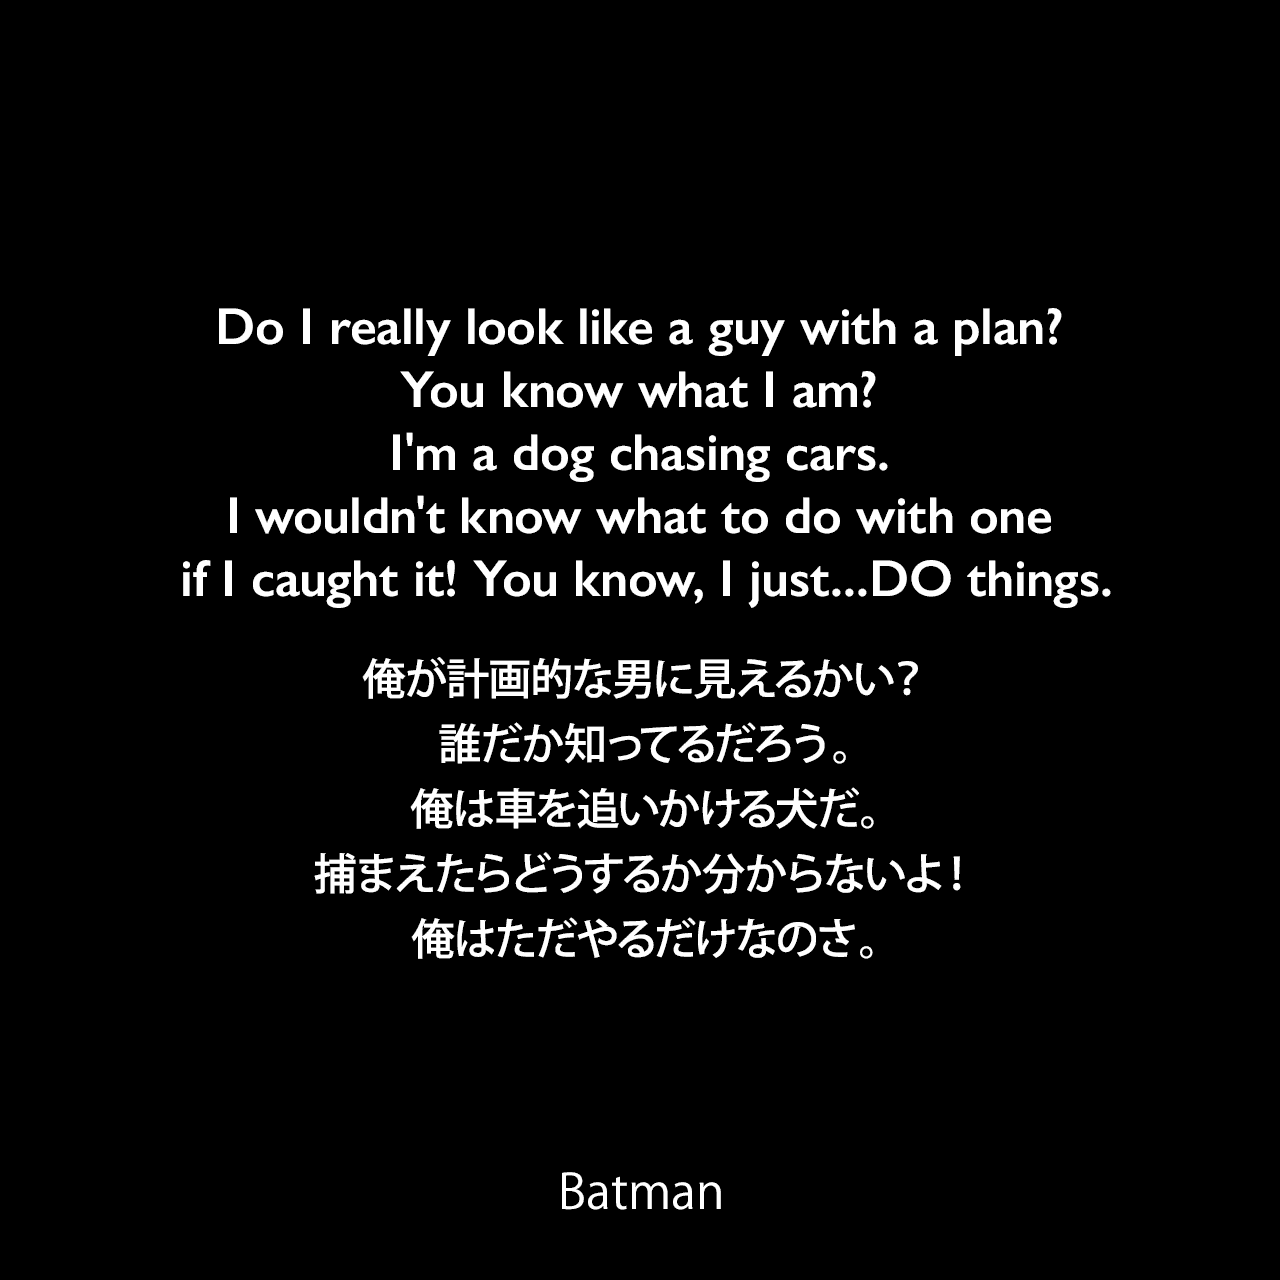 Do I really look like a guy with a plan? You know what I am? I'm a dog chasing cars. I wouldn't know what to do with one if I caught it! You know, I just...DO things.俺が計画的な男に見えるかい？誰だか知ってるだろう。俺は車を追いかける犬だ。捕まえたらどうするか分からないよ！俺はただやるだけなのさ。- Jorker  